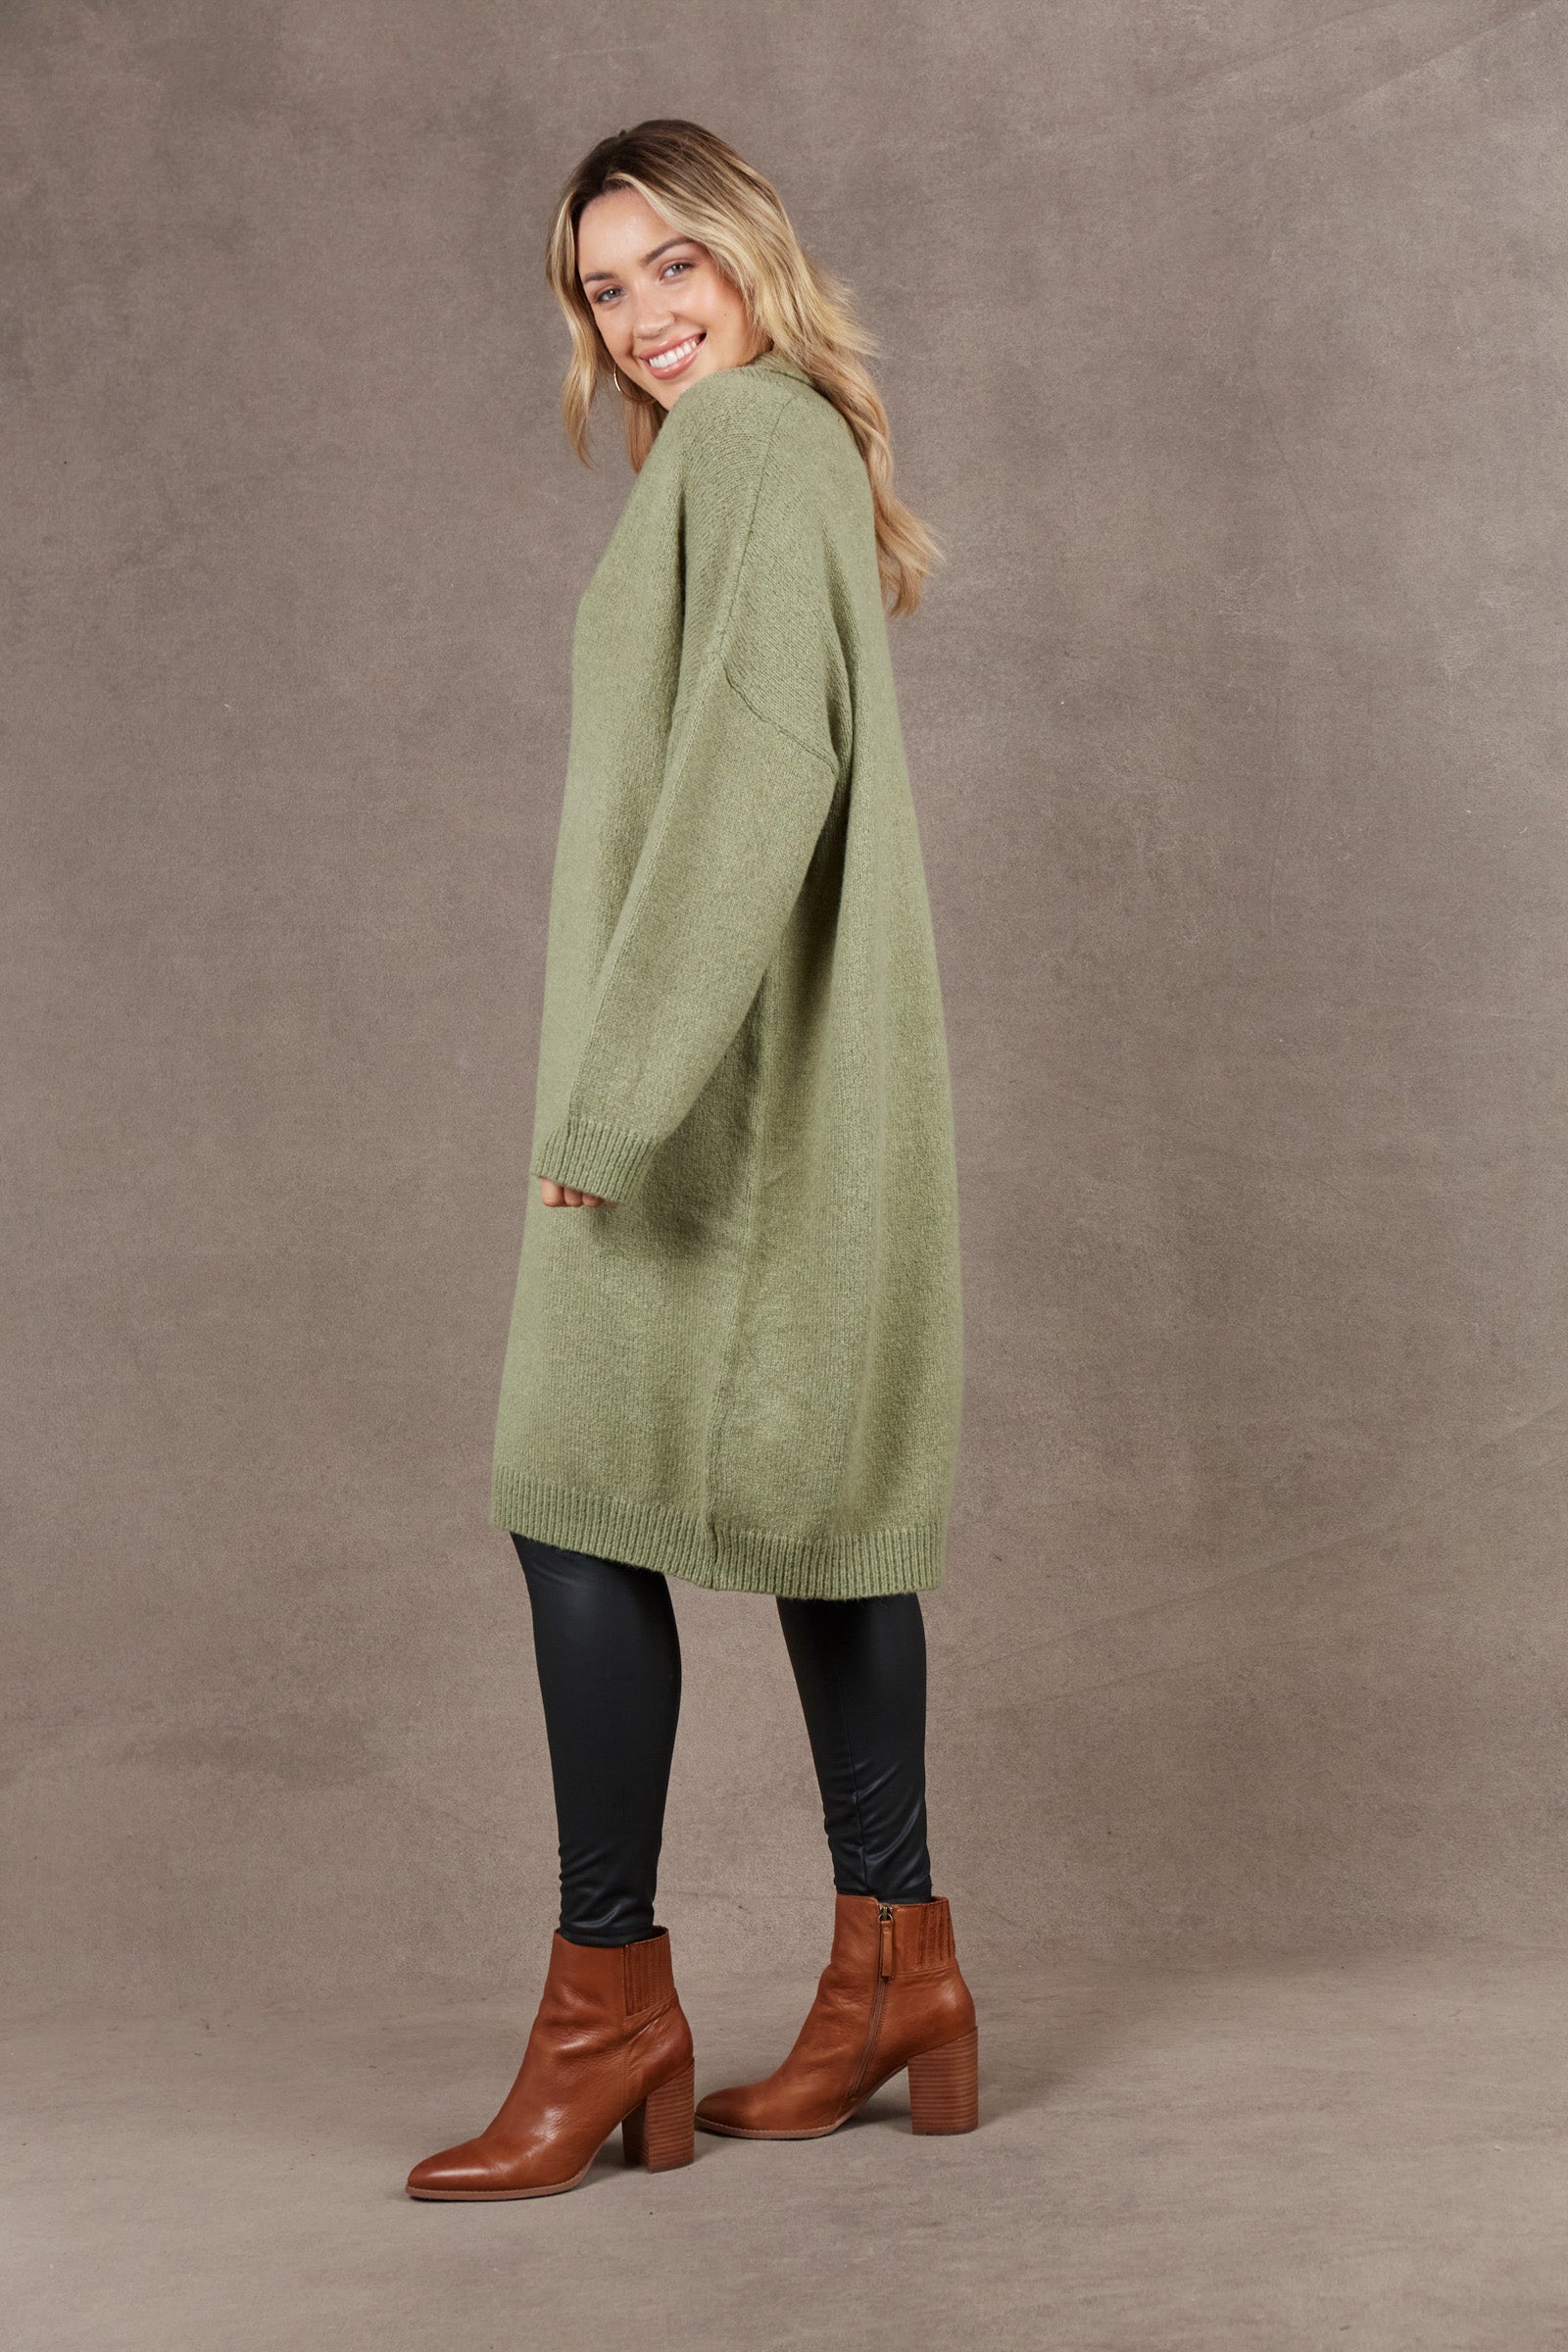 Paarl Top/Dress - Sage - eb&ive Clothing - Knit Jumper One Size